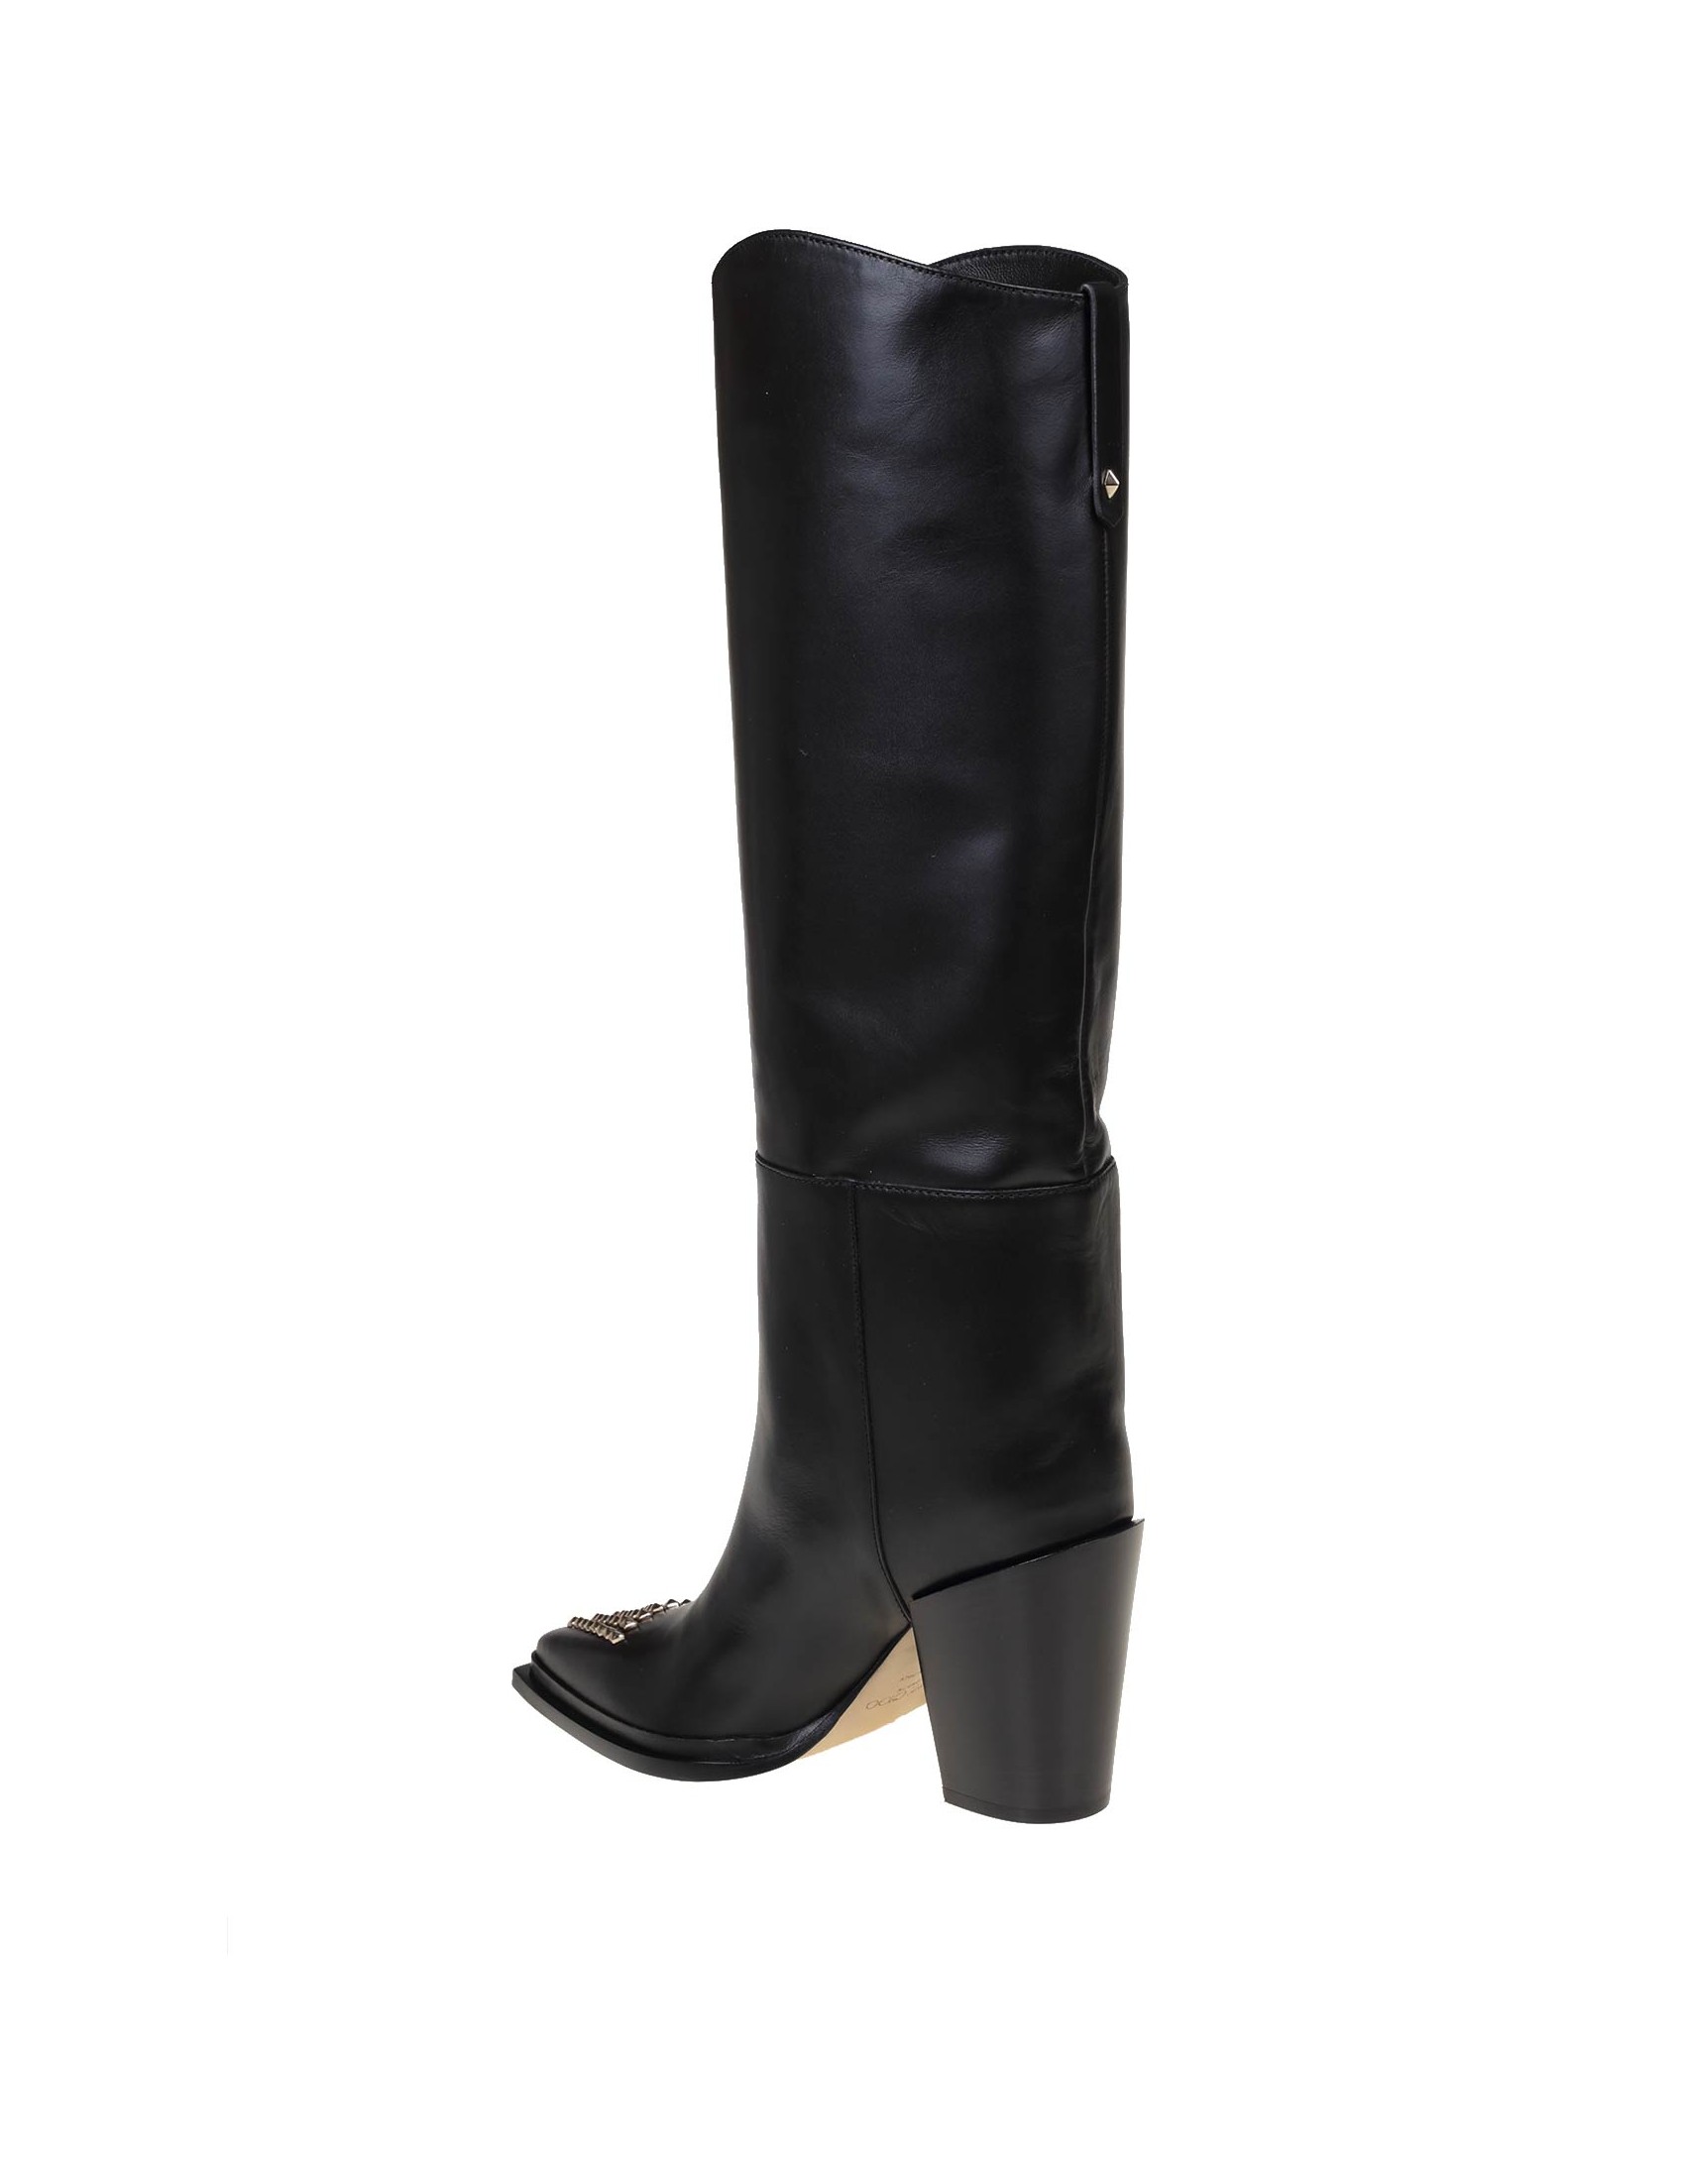 JIMMY CHOO CECE 80 BOOTS IN BLACK LEATHER